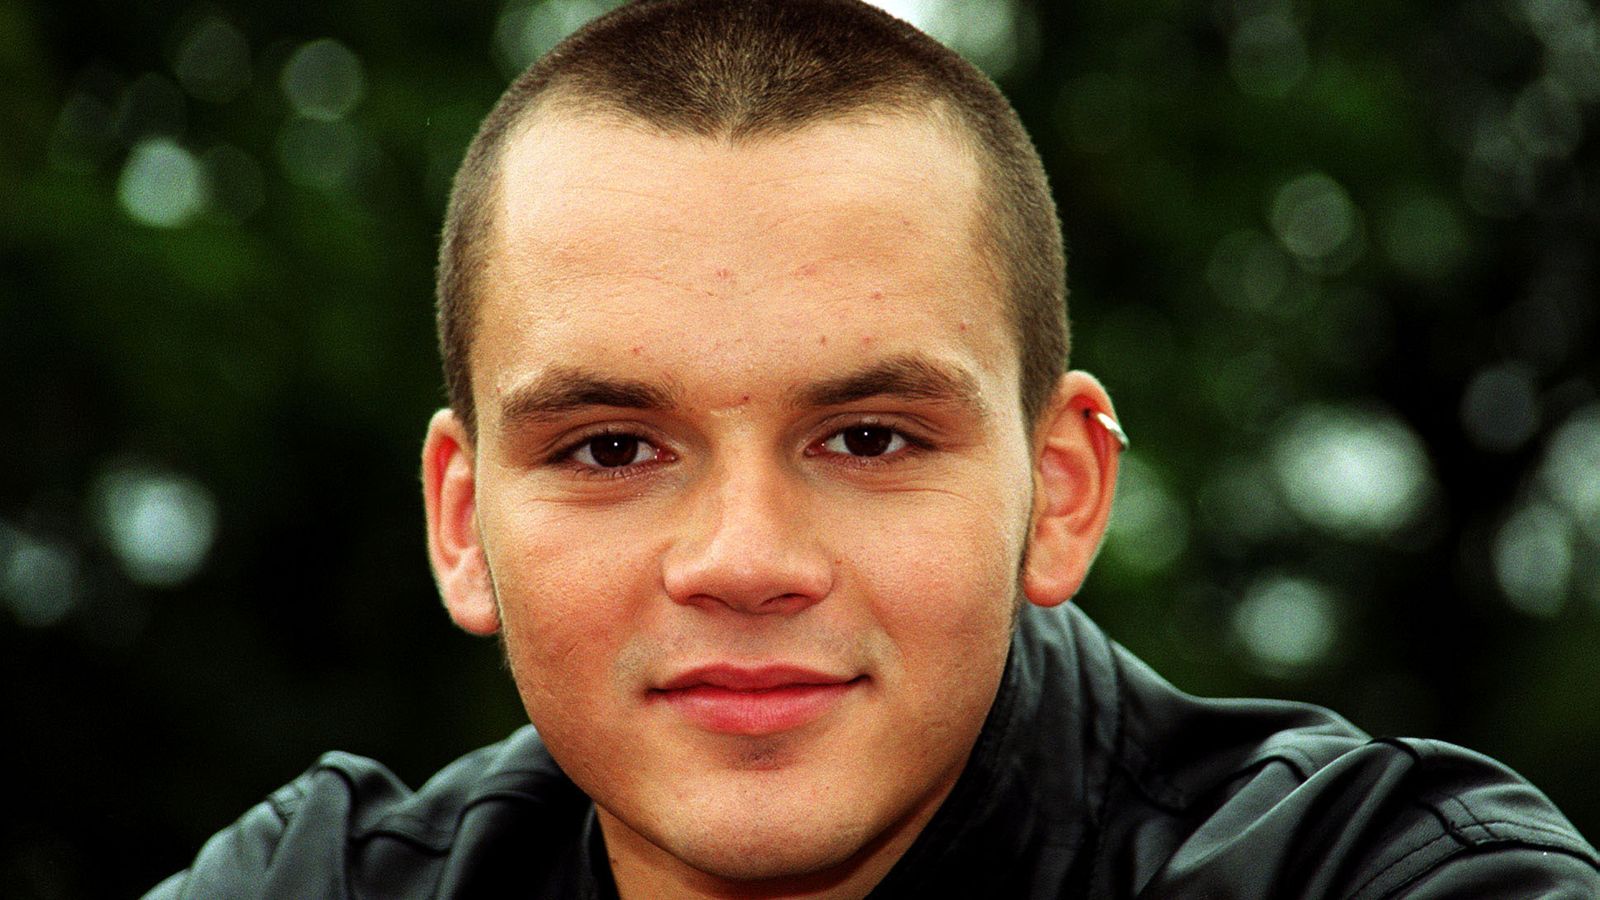 S Club 7's Paul Cattermole dies 'unexpectedly' aged 46